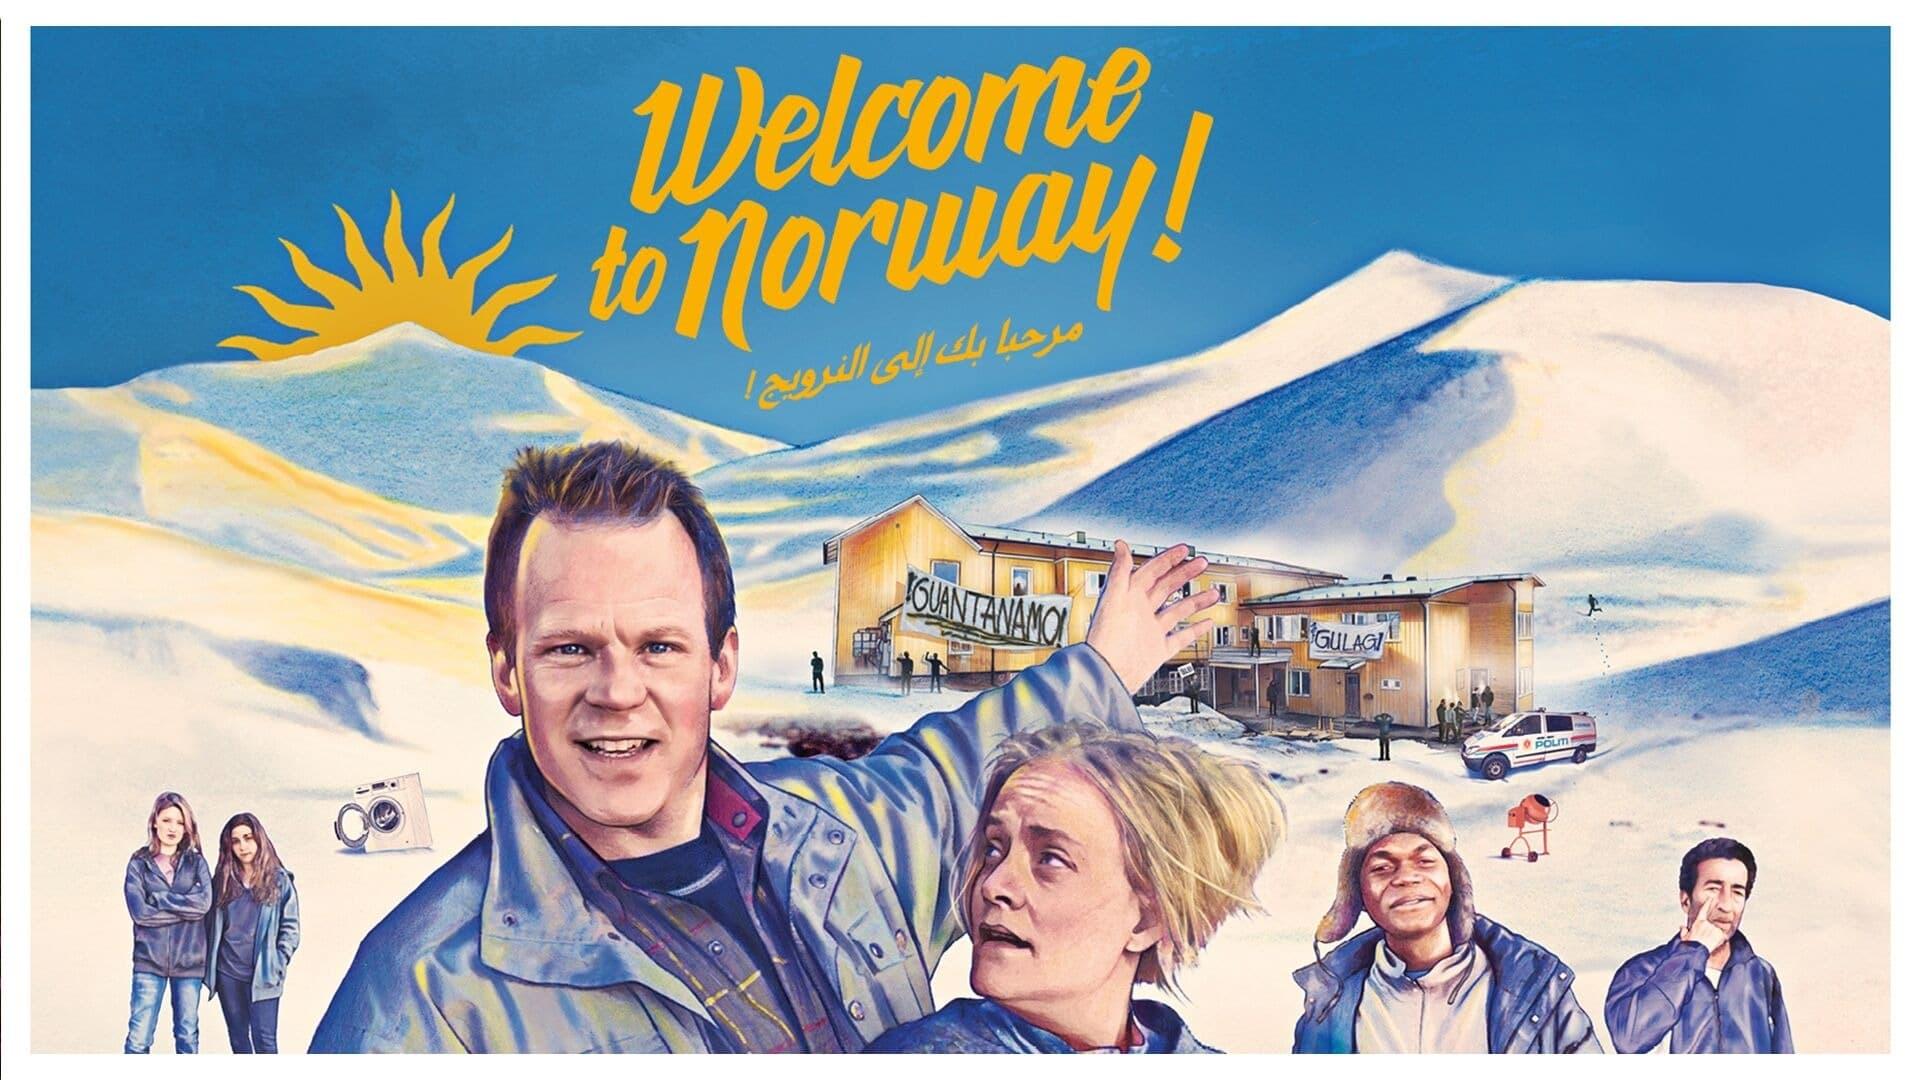 Welcome to Norway! backdrop